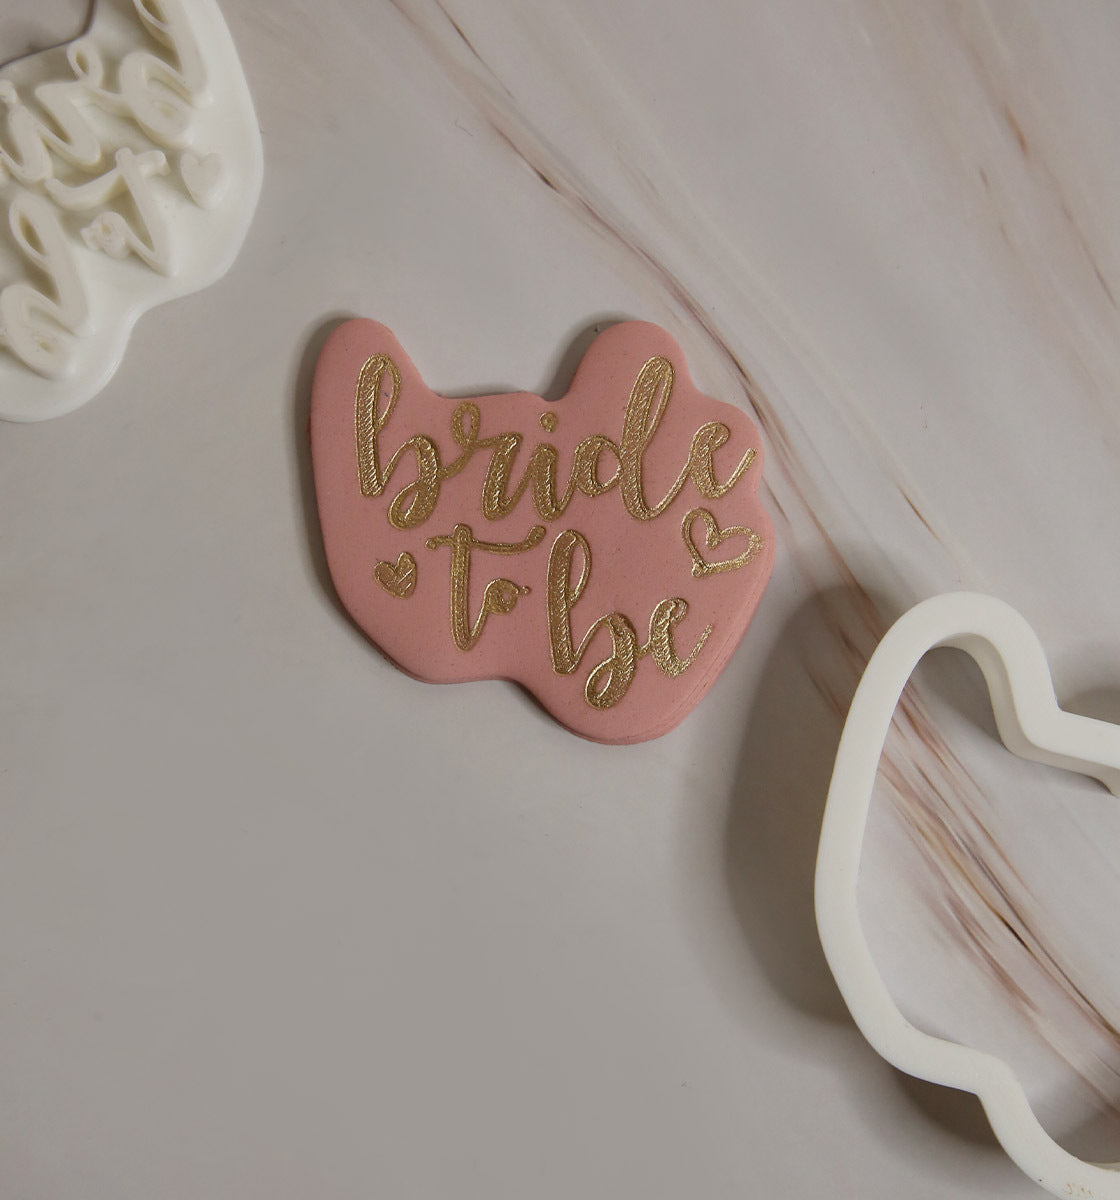 Bride to be - Cutter & Stamp set